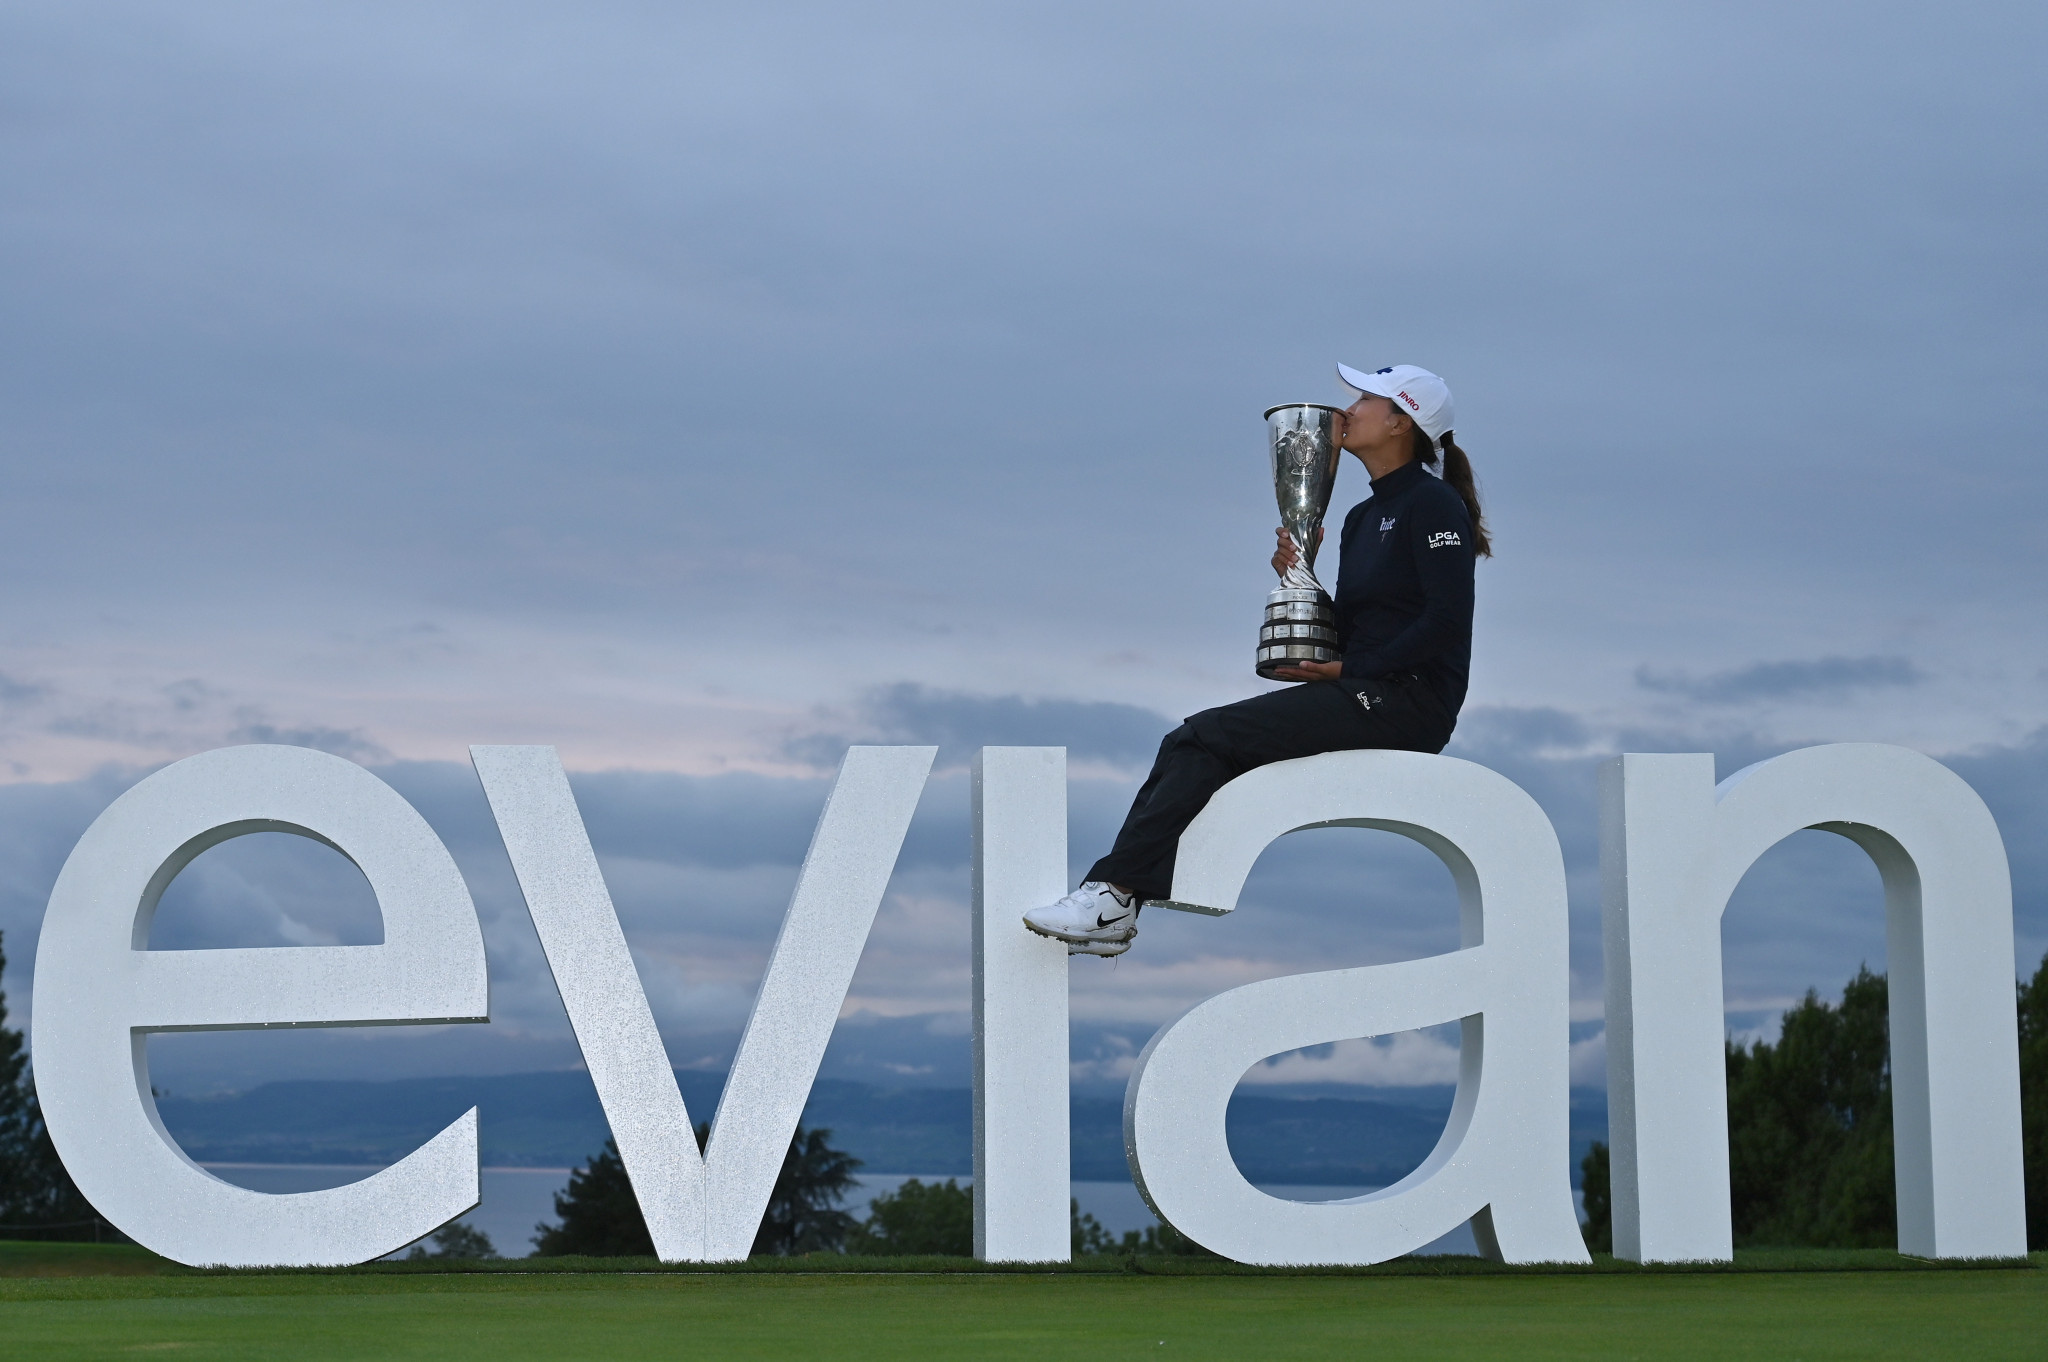 The Evian Championship - won by Ko Jin-young - has been moved to take advantage of a window previous allocated to Tokyo 2020